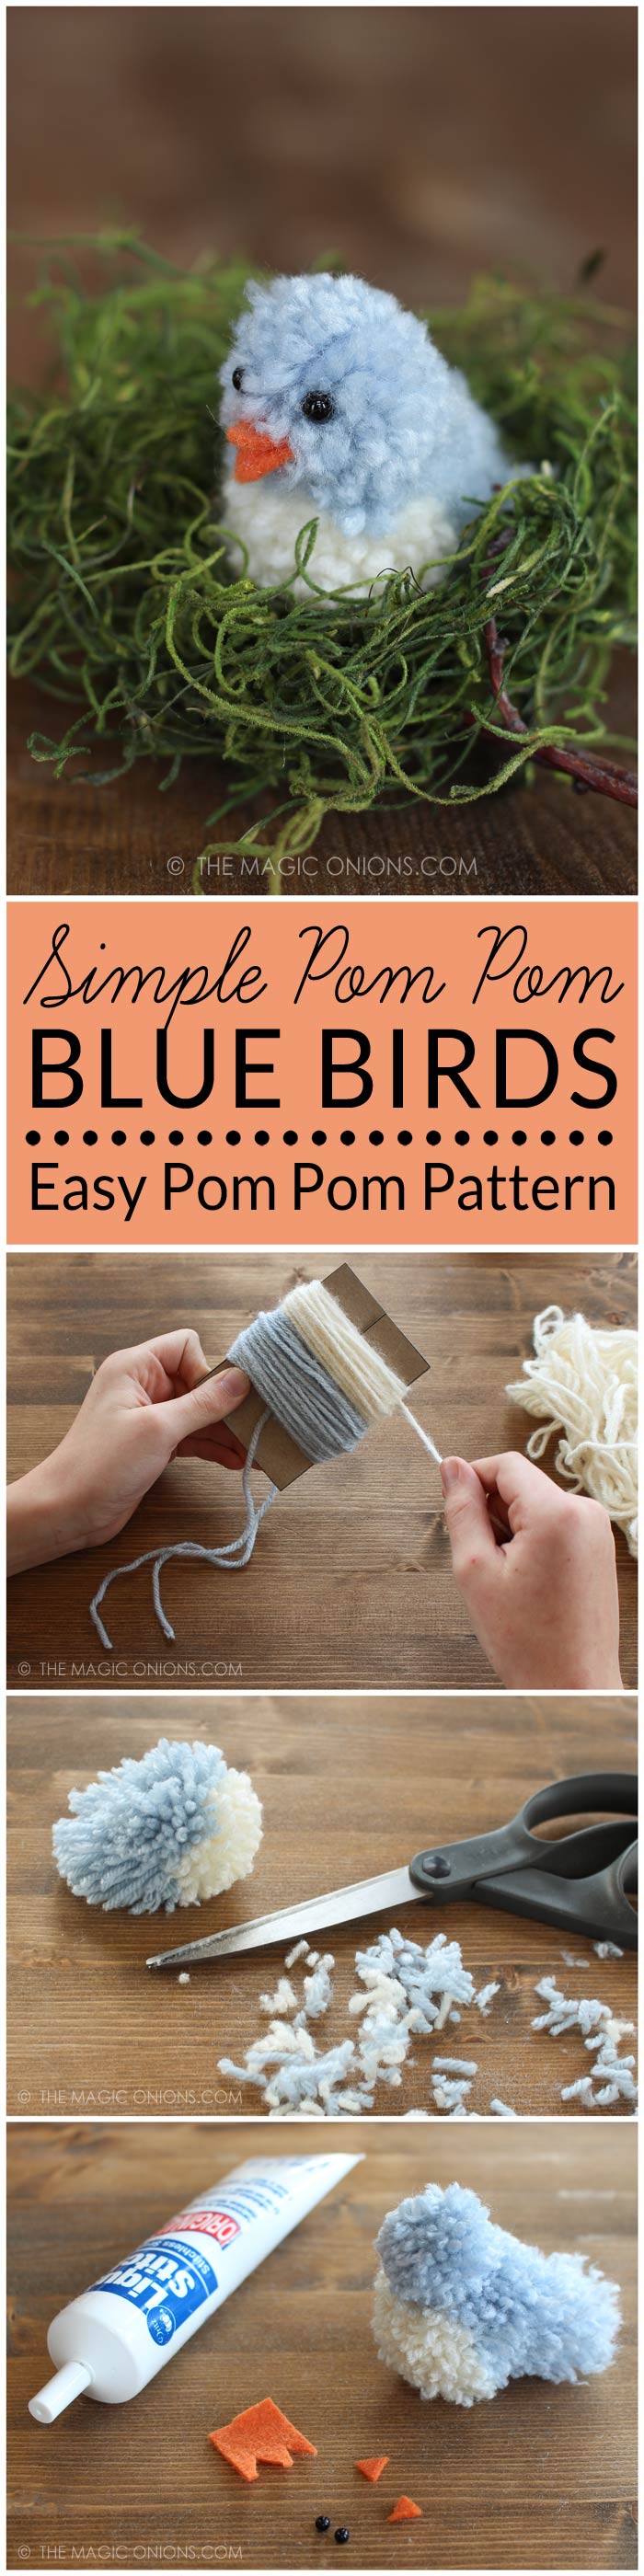 DIY Yarn Pom Pom Blue Birds for Simple Spring and Easter Crafting :: www.theMagicOnions.com